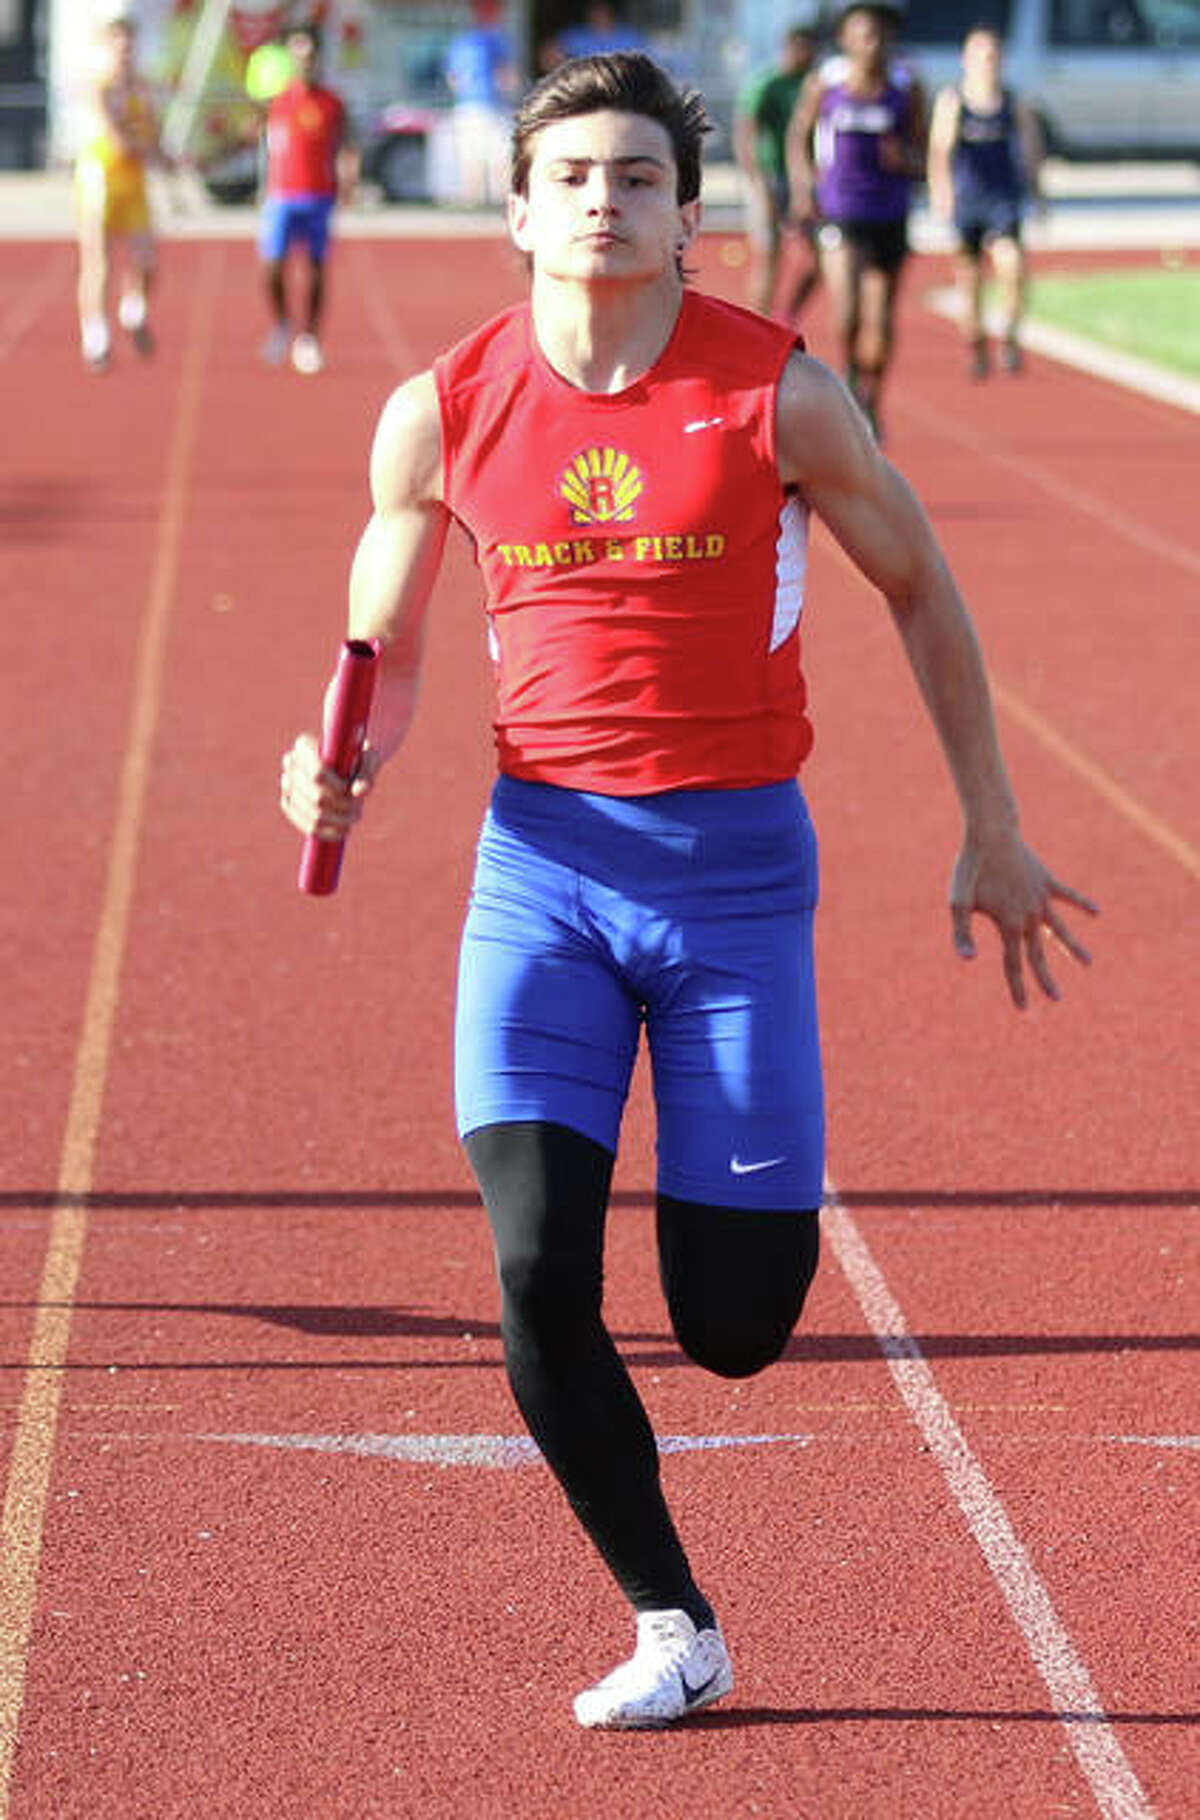 Roxana’s Dylan Murray brings home the 4x100 relay for the Shells at the Madison County Meet on April 22 in Roxana. The Shells sophomore took on a large-schools field in the 100 meters on Saturday at the Collinsville Invite and finished sixth in 11.37 seconds.